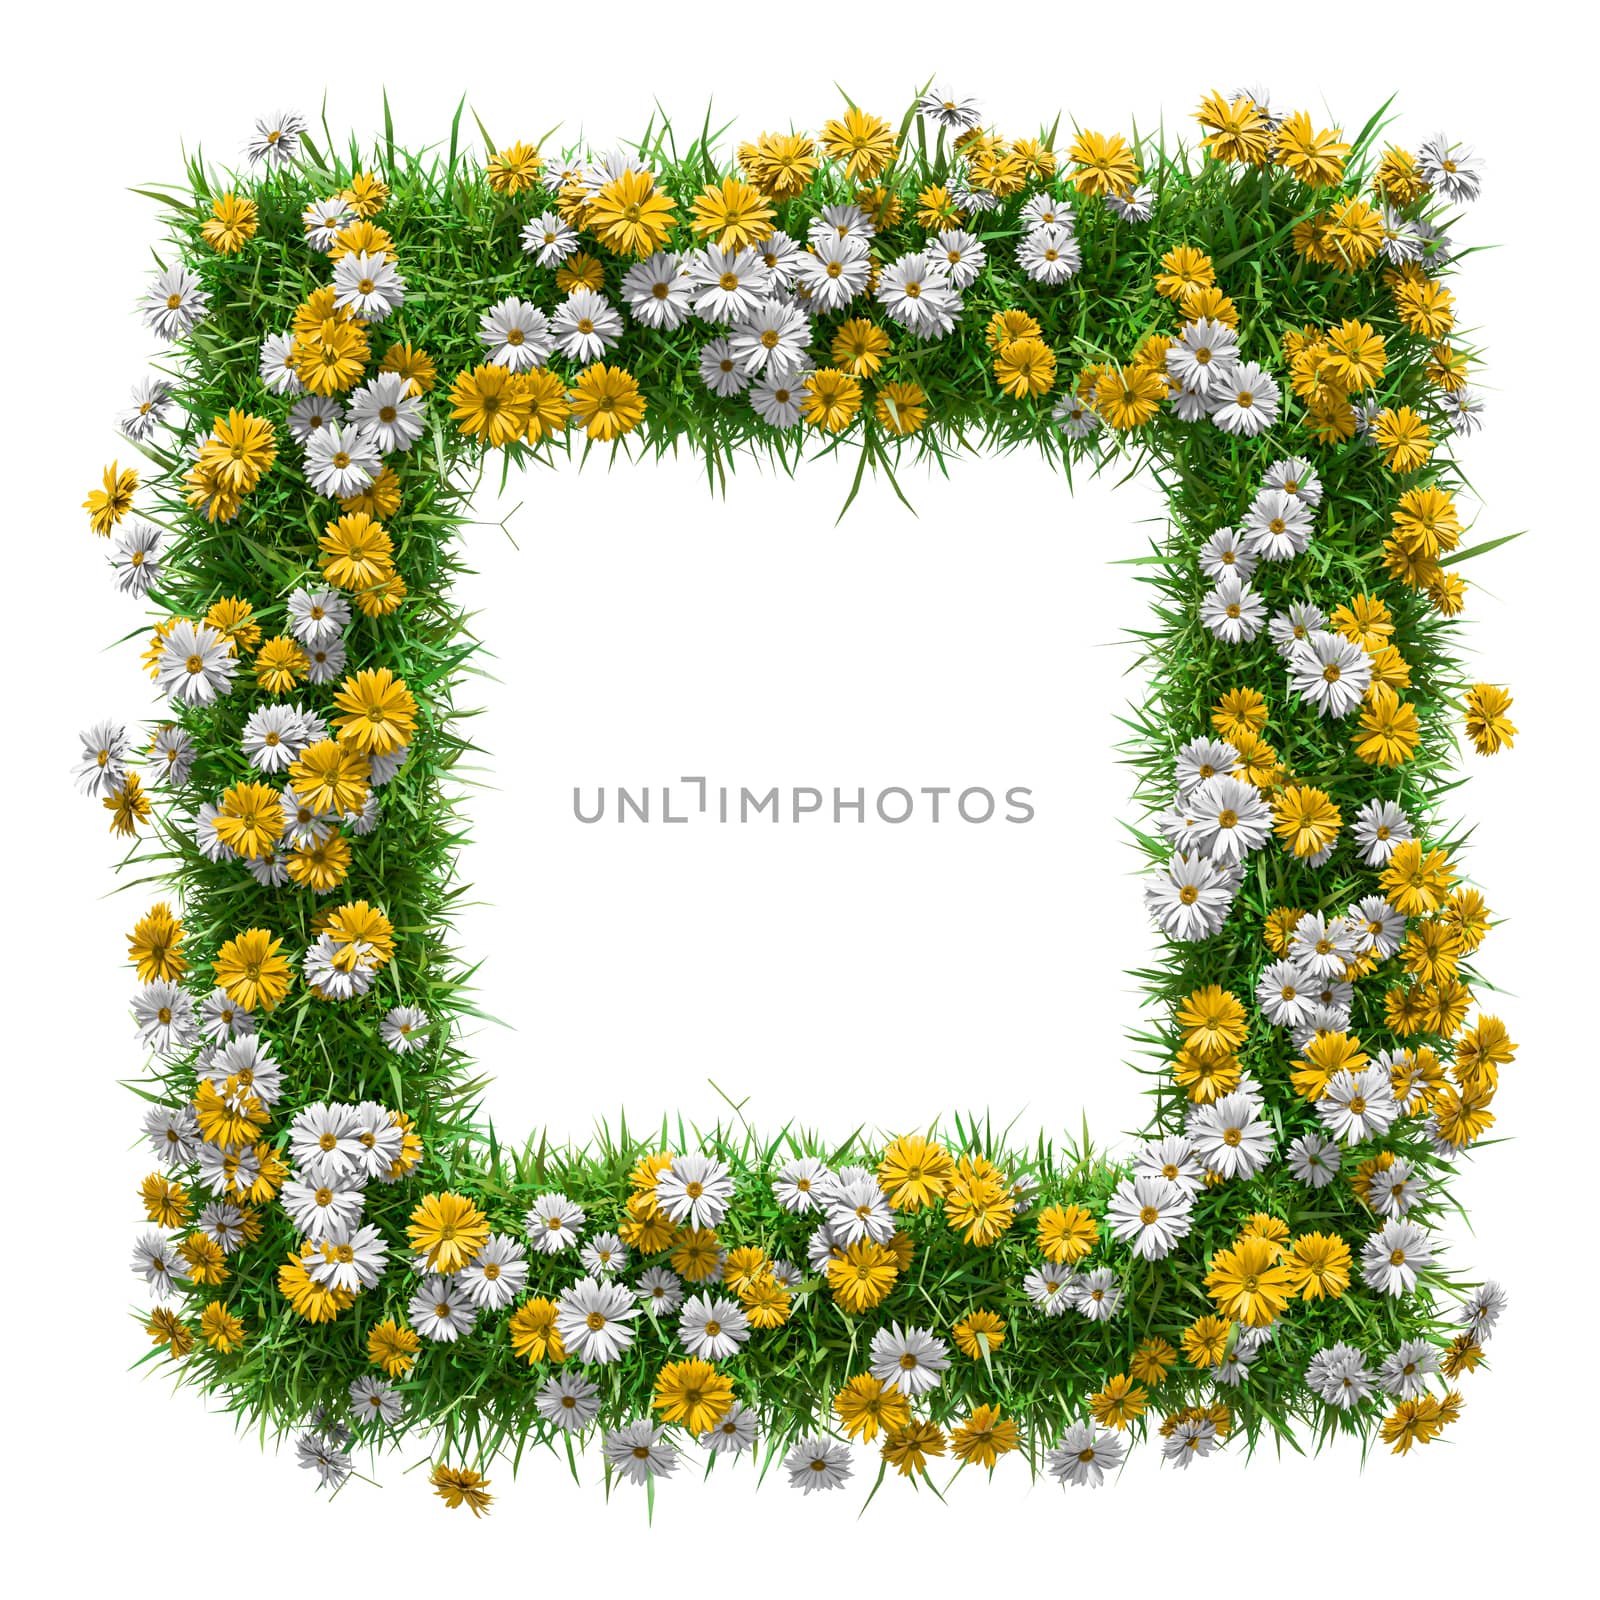 Flowers and green grass frame by cherezoff